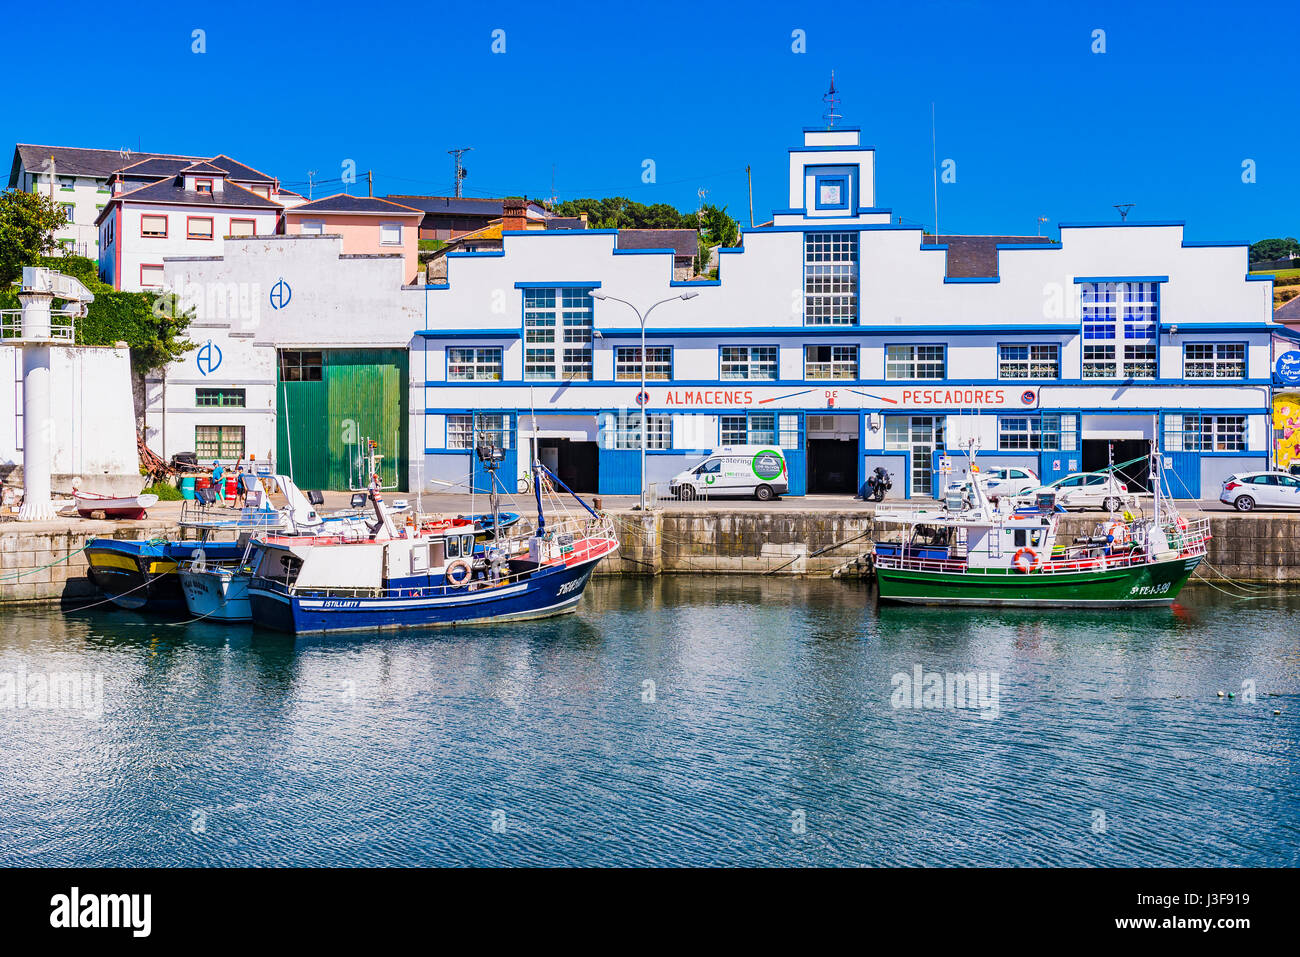 Puerto de Vega is one of eight parishes, administrative divisions, in Navia, a municipality within the province and autonomous community of Principali Stock Photo